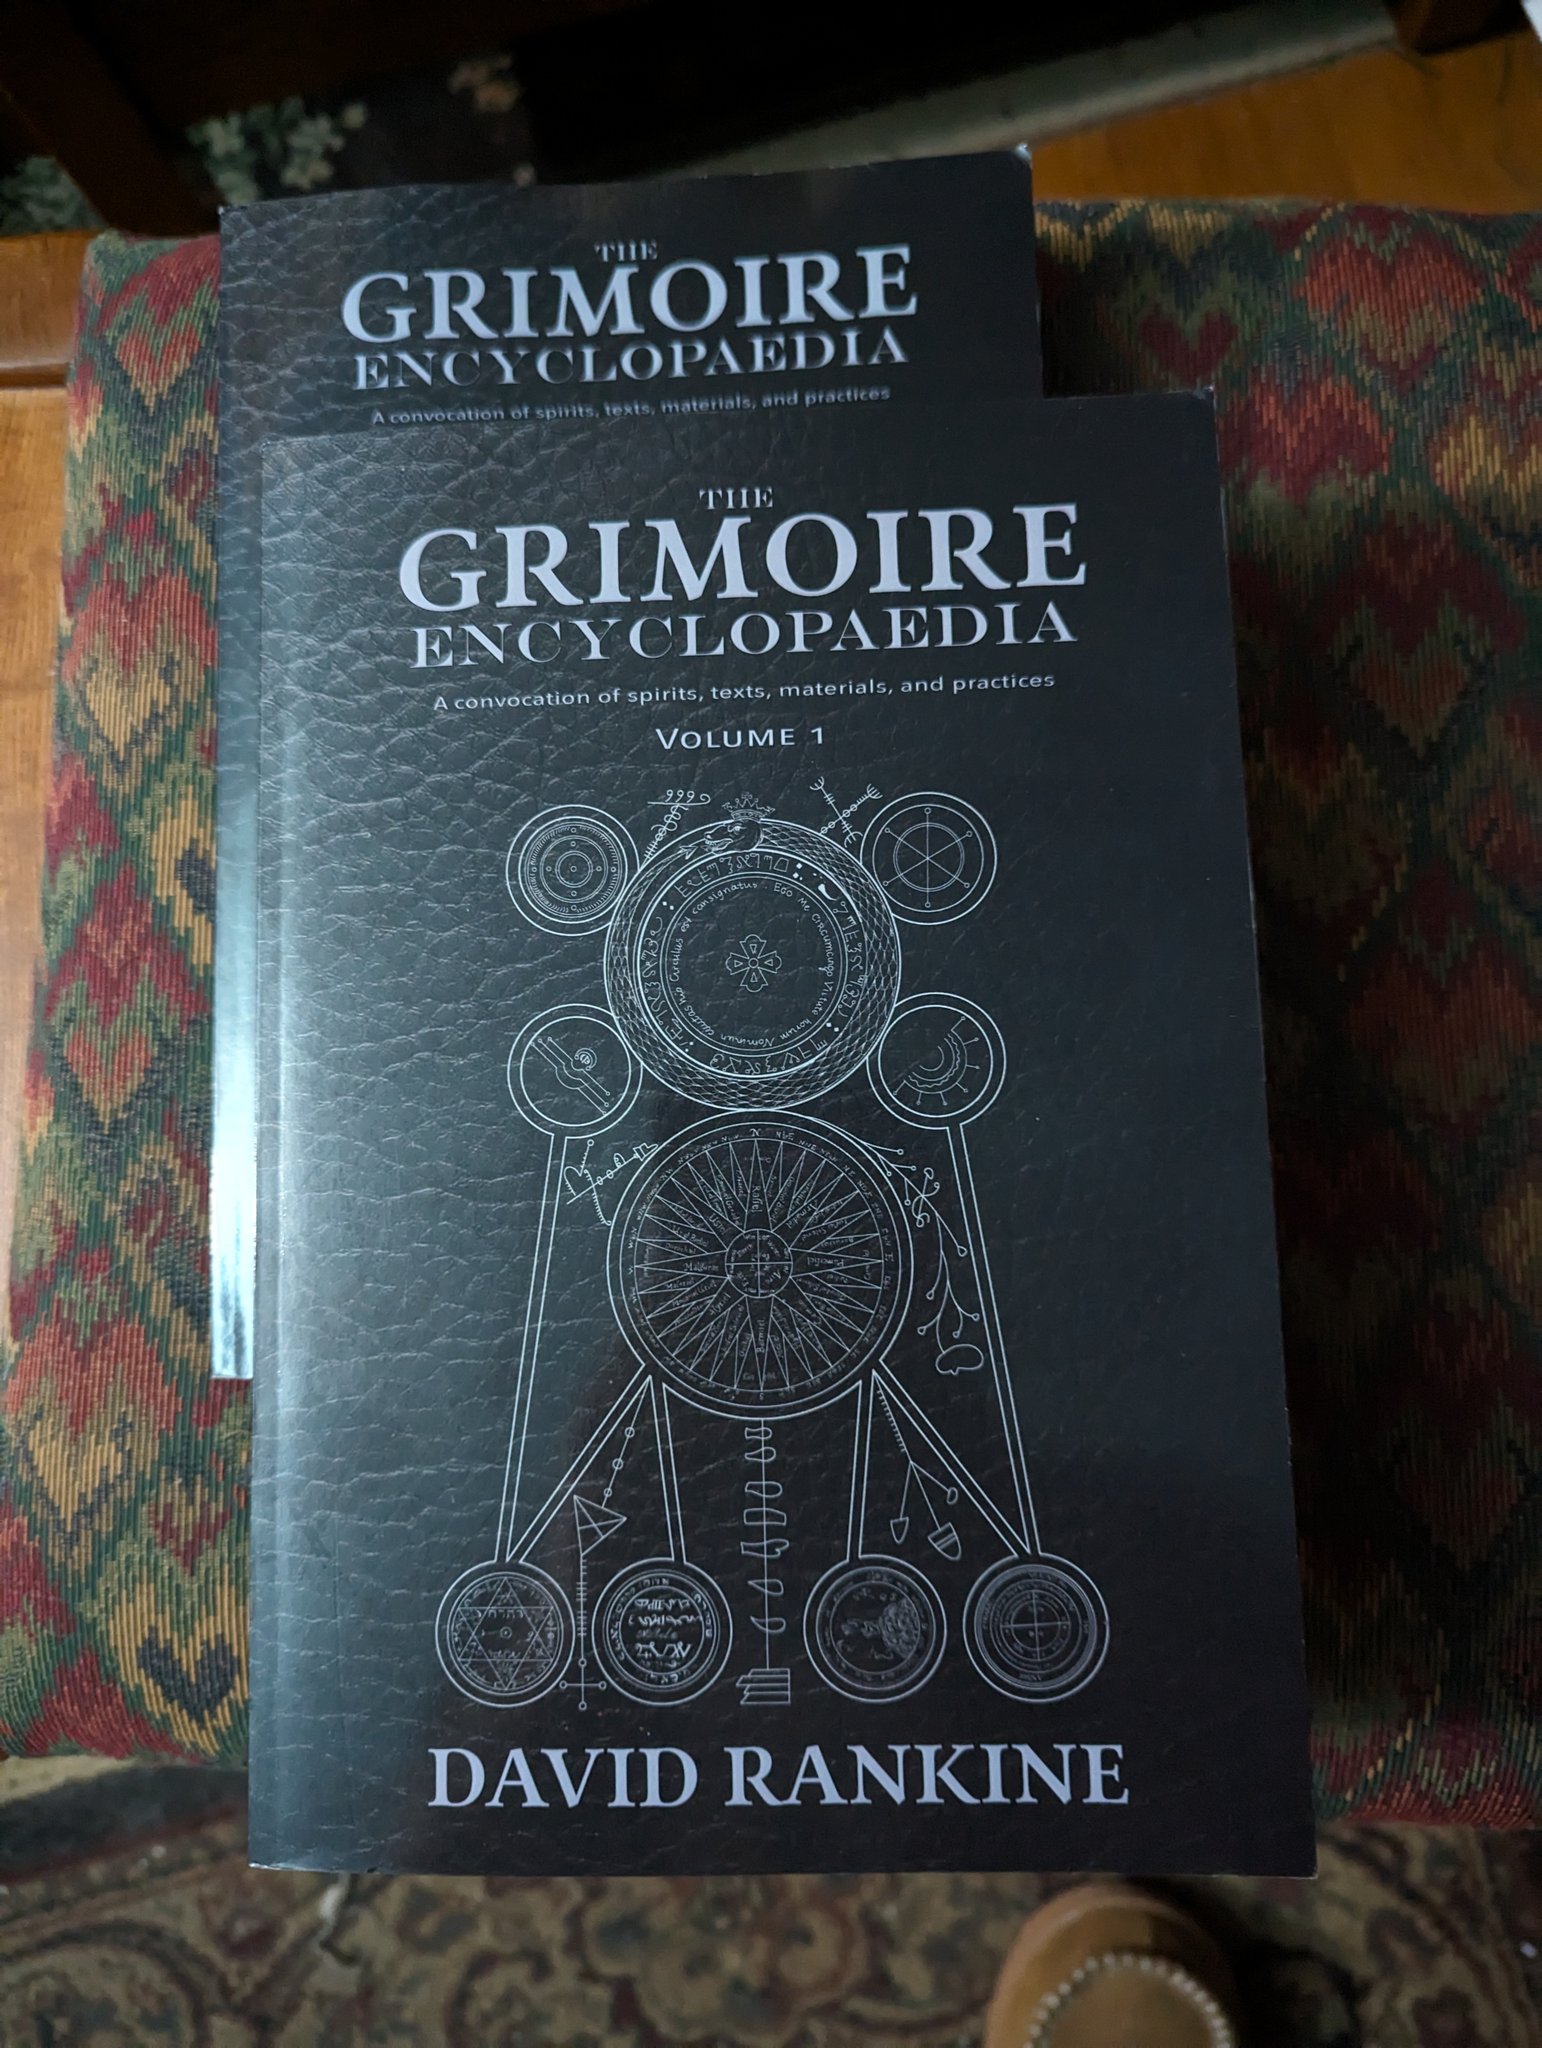 The Grimoire Encyclopaedia: Volume 1: A convocation of spirits